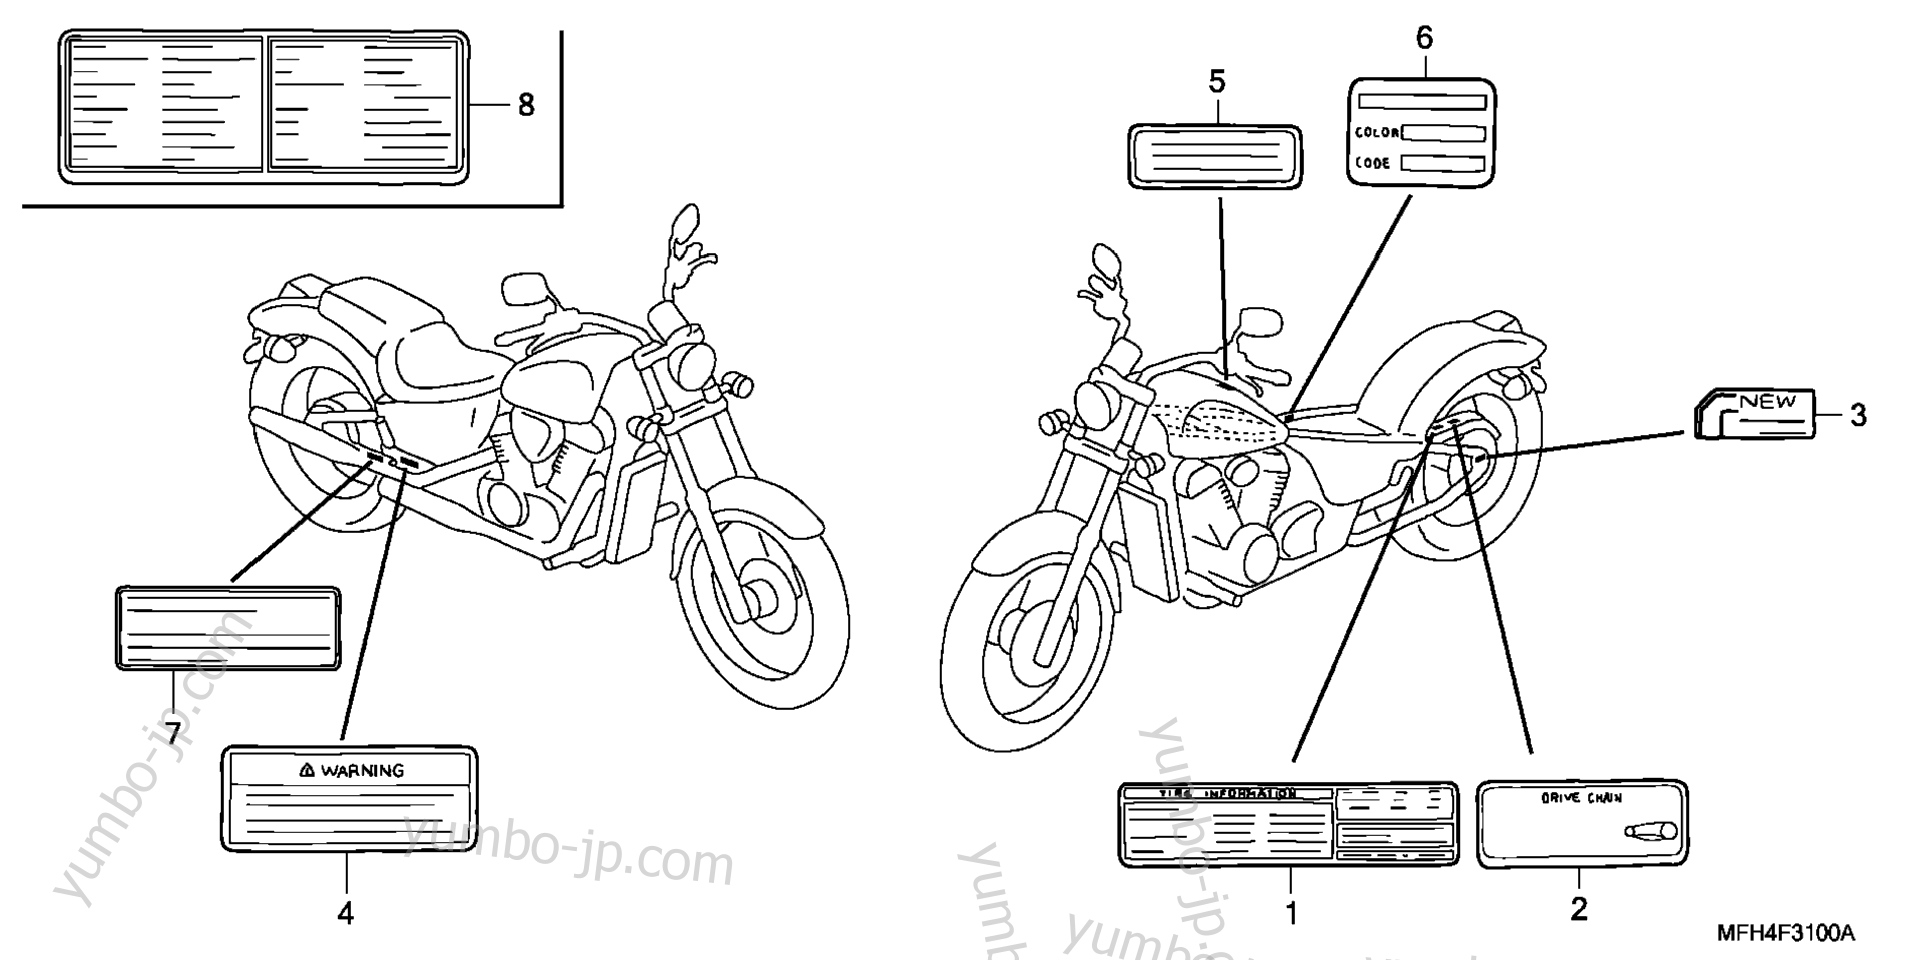 LABELS for motorcycles HONDA VT600C A/A 2006 year